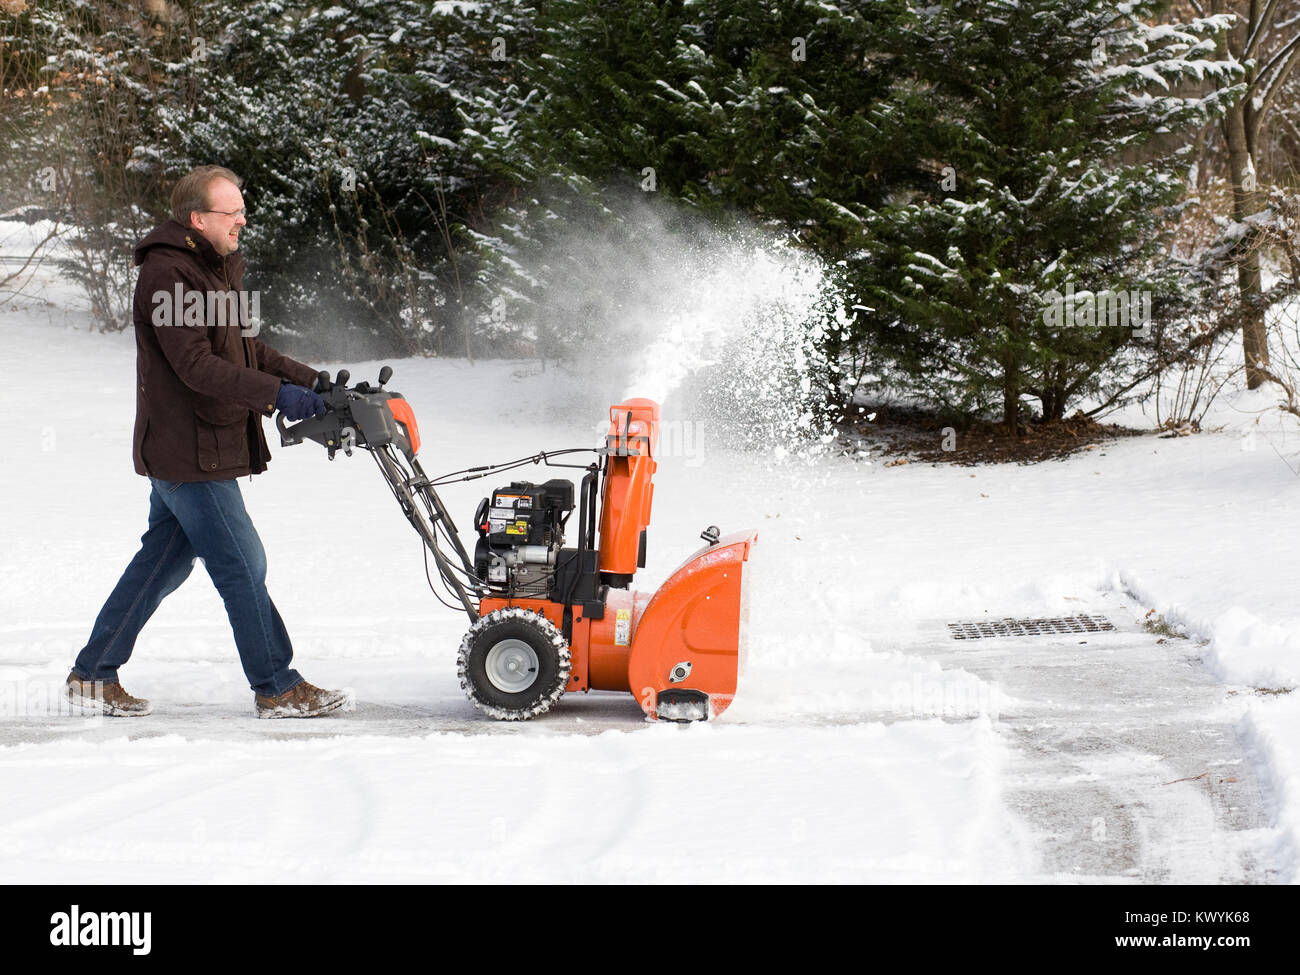 A man clearing the snow using a home snow blower. Stock Photo